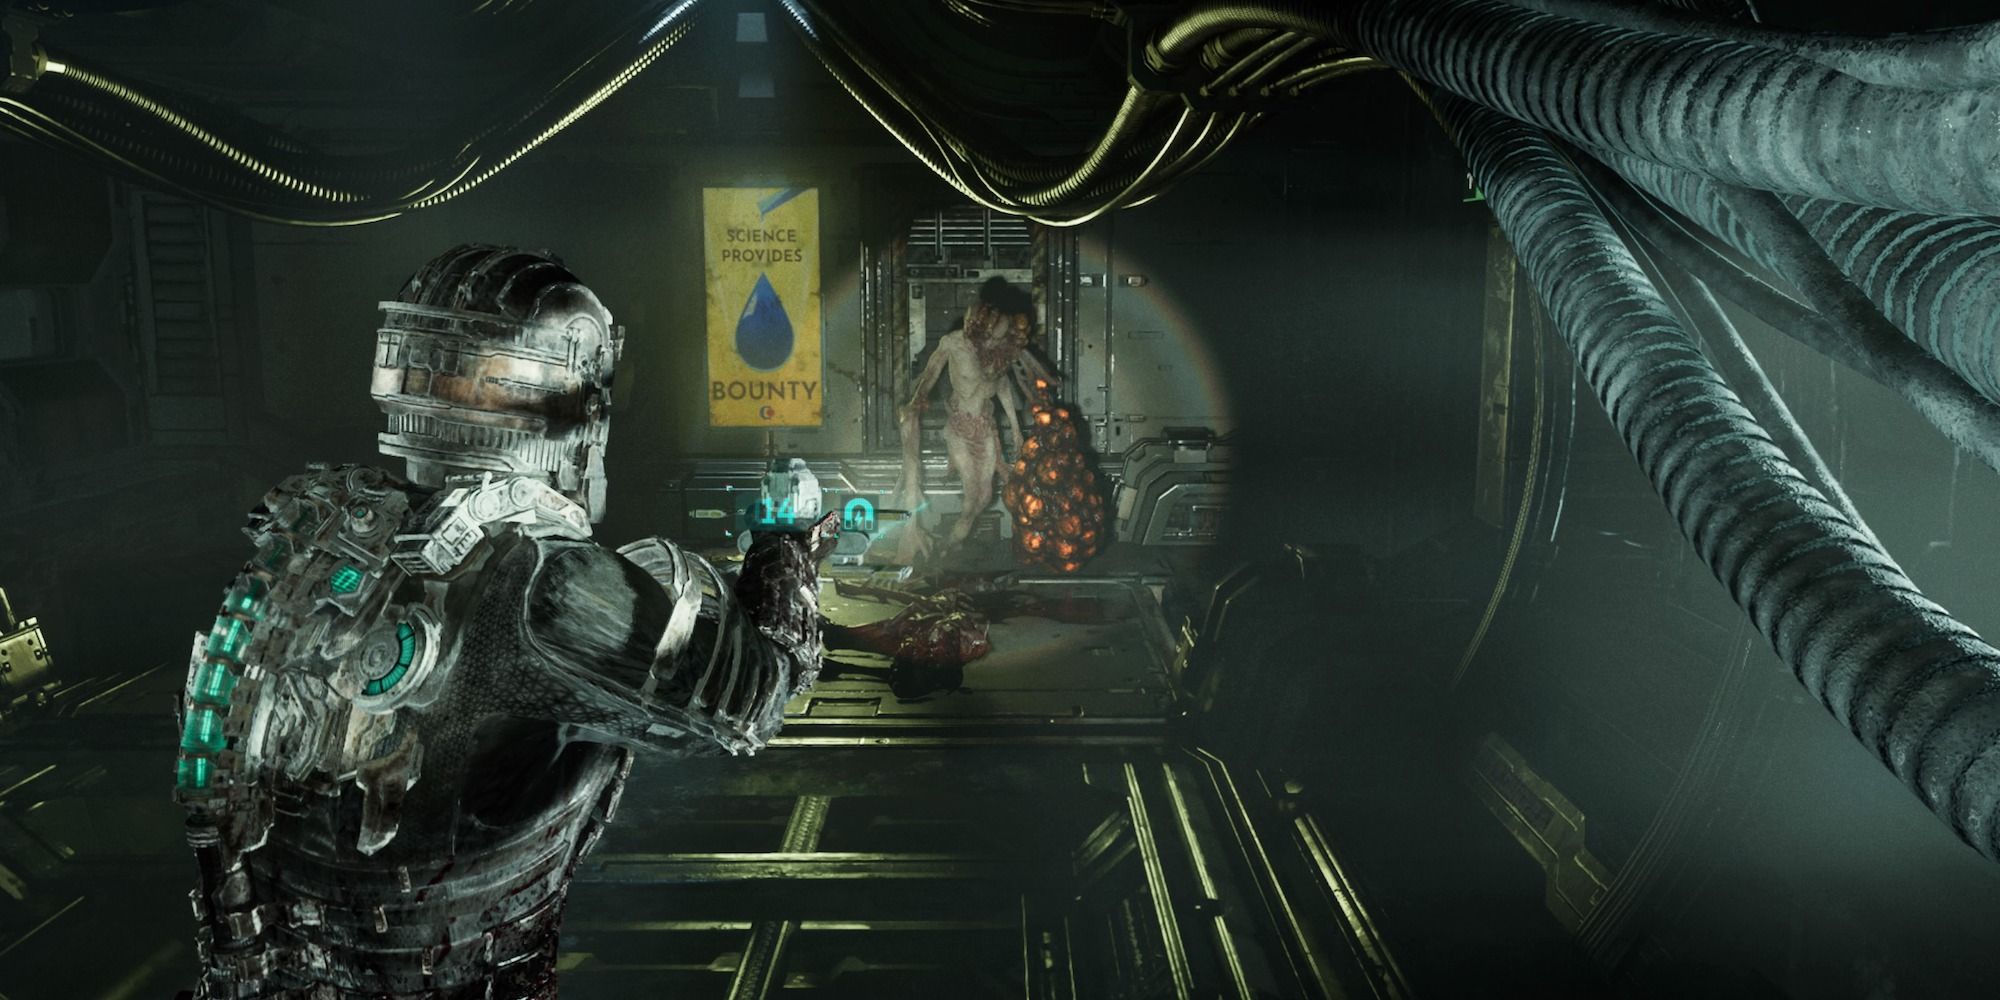 Dead Space aiming at exploding necromorph